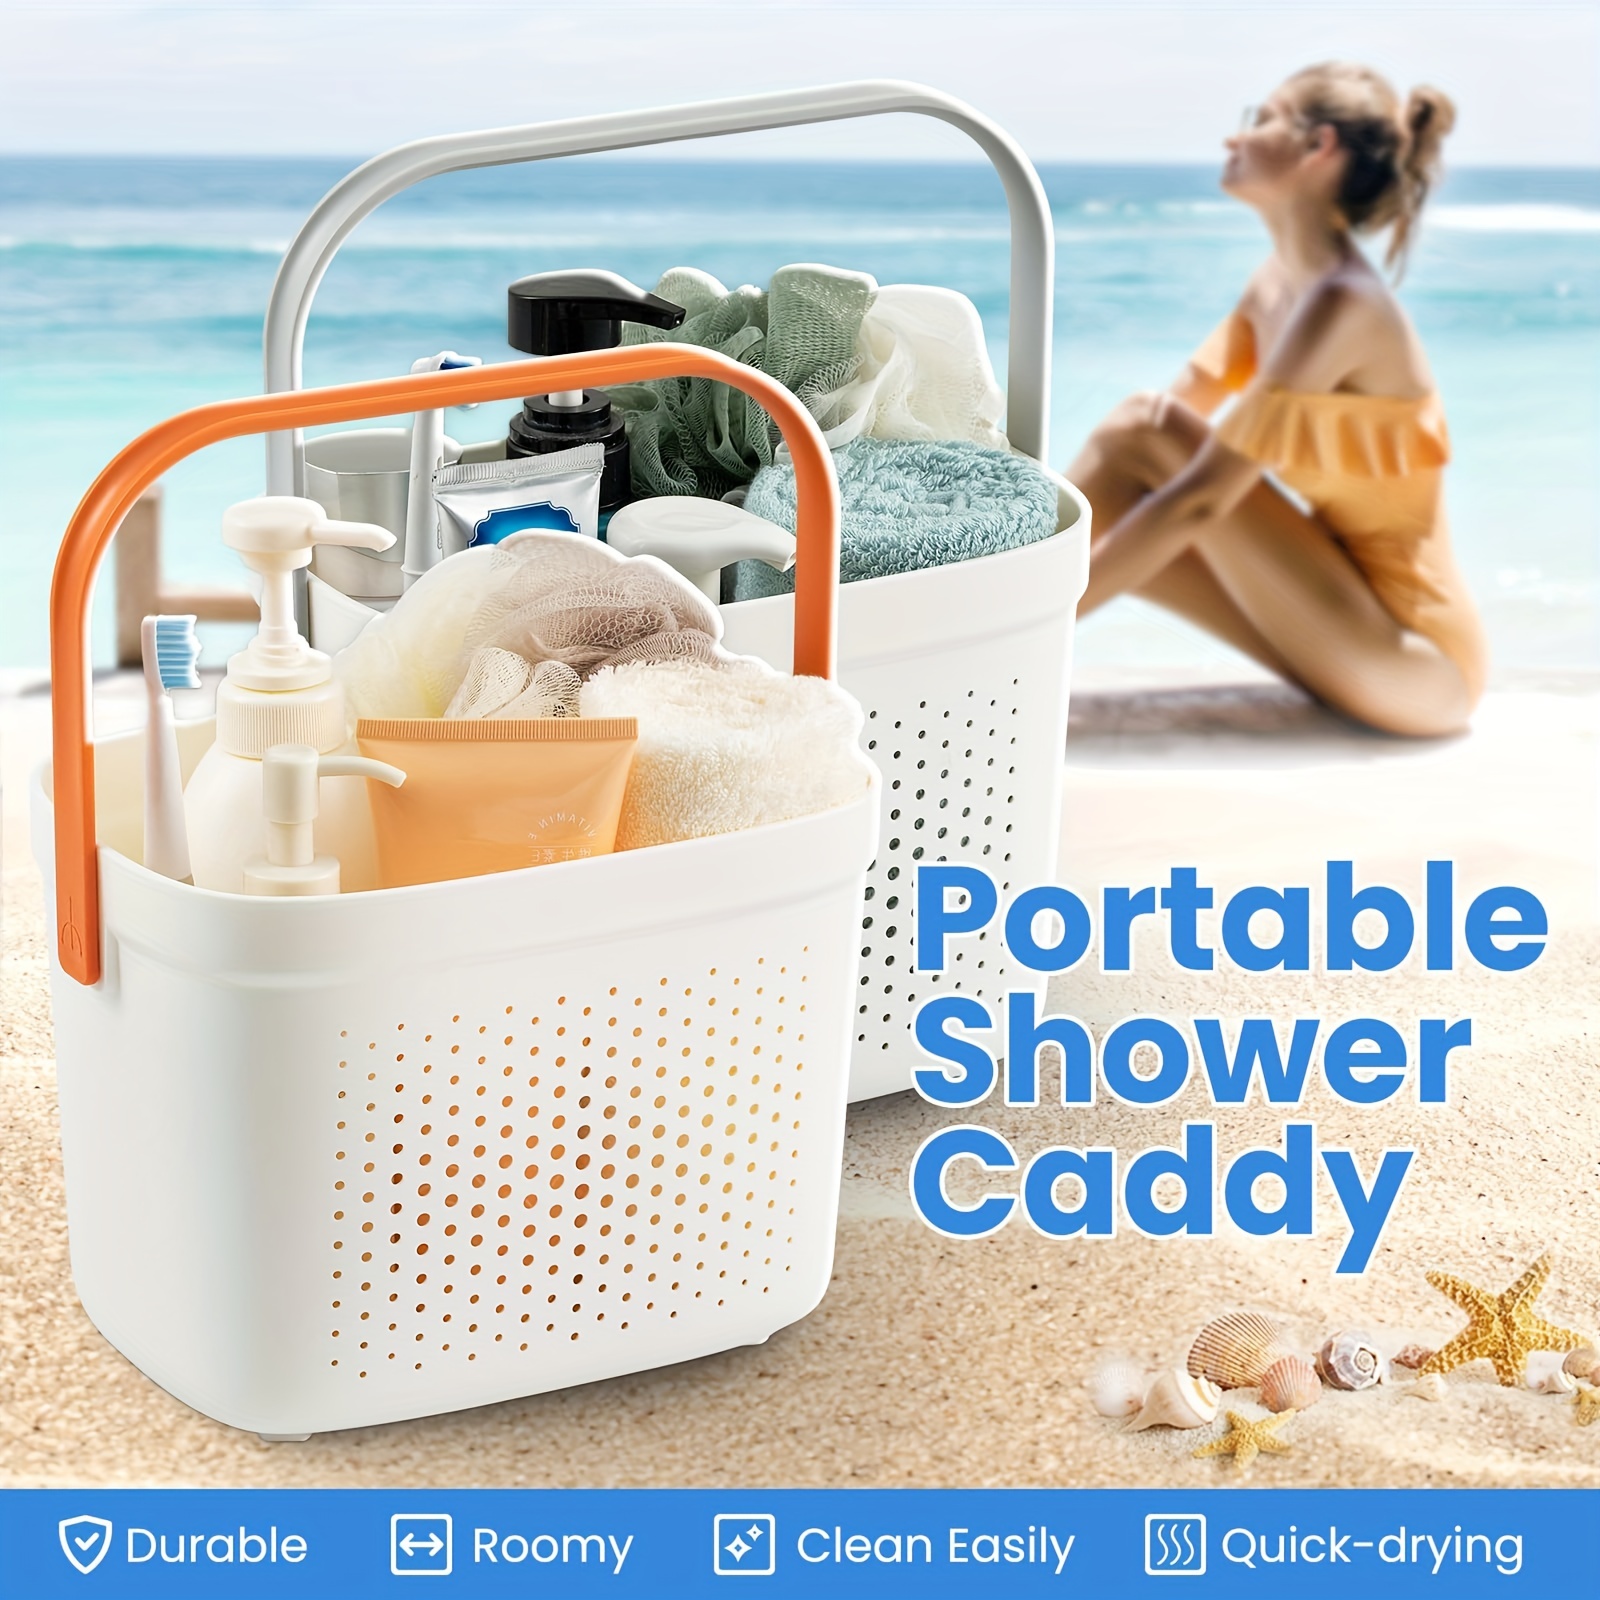 UUJOLY Plastic Portable Shower Caddy Basket Bucket, Cleaning Shower Basket  with Handle Compartments Storage Basket Organizer for Bathroom Kitchen